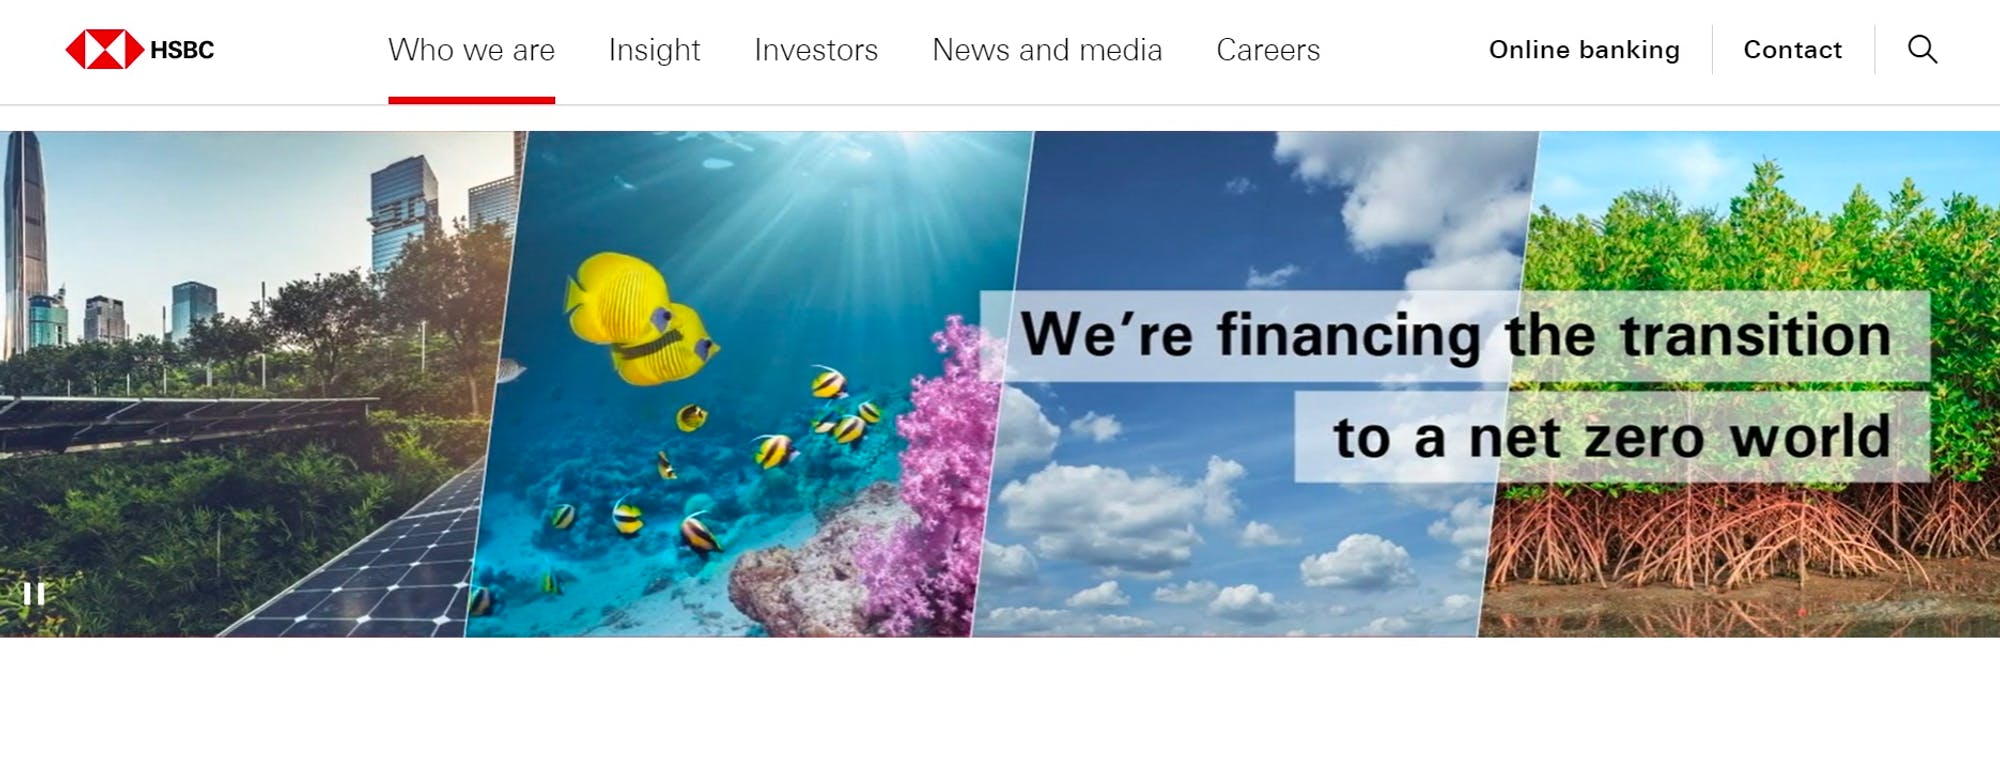 Screenshot of HSBC Website reading "We're financing the transition to a net zero world"